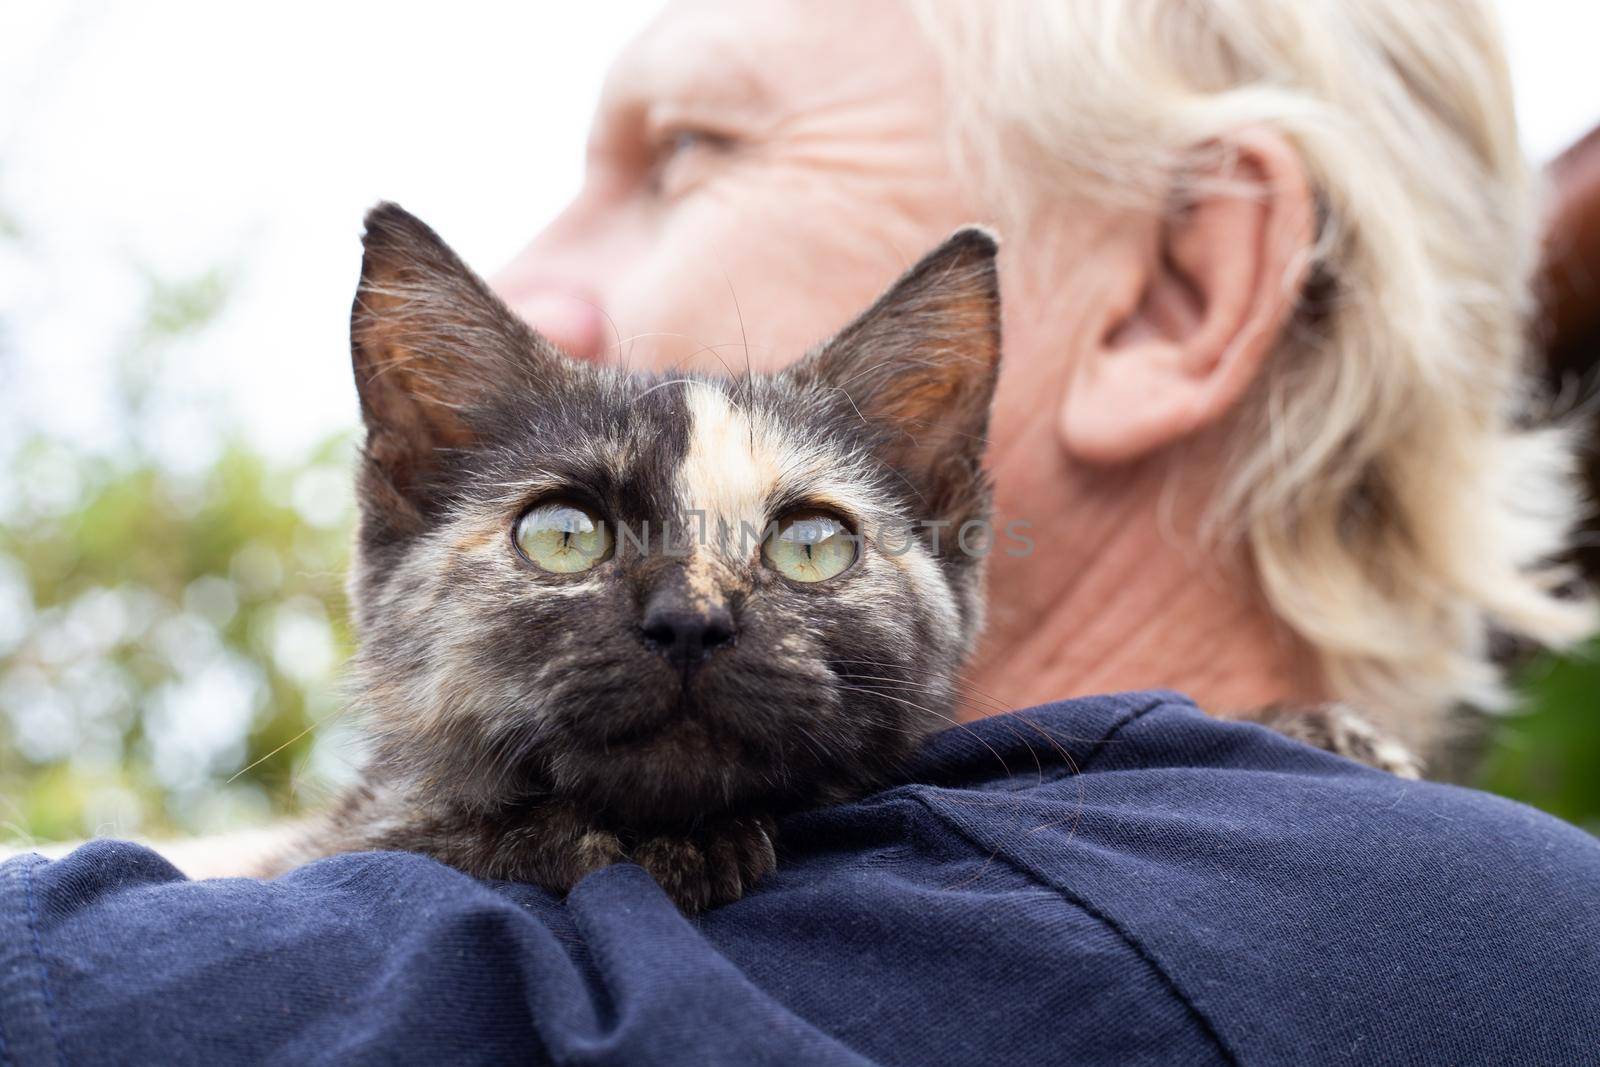 A kitten with a strip on the nose on the shoulder of an adult man. Love for pets by levnat09